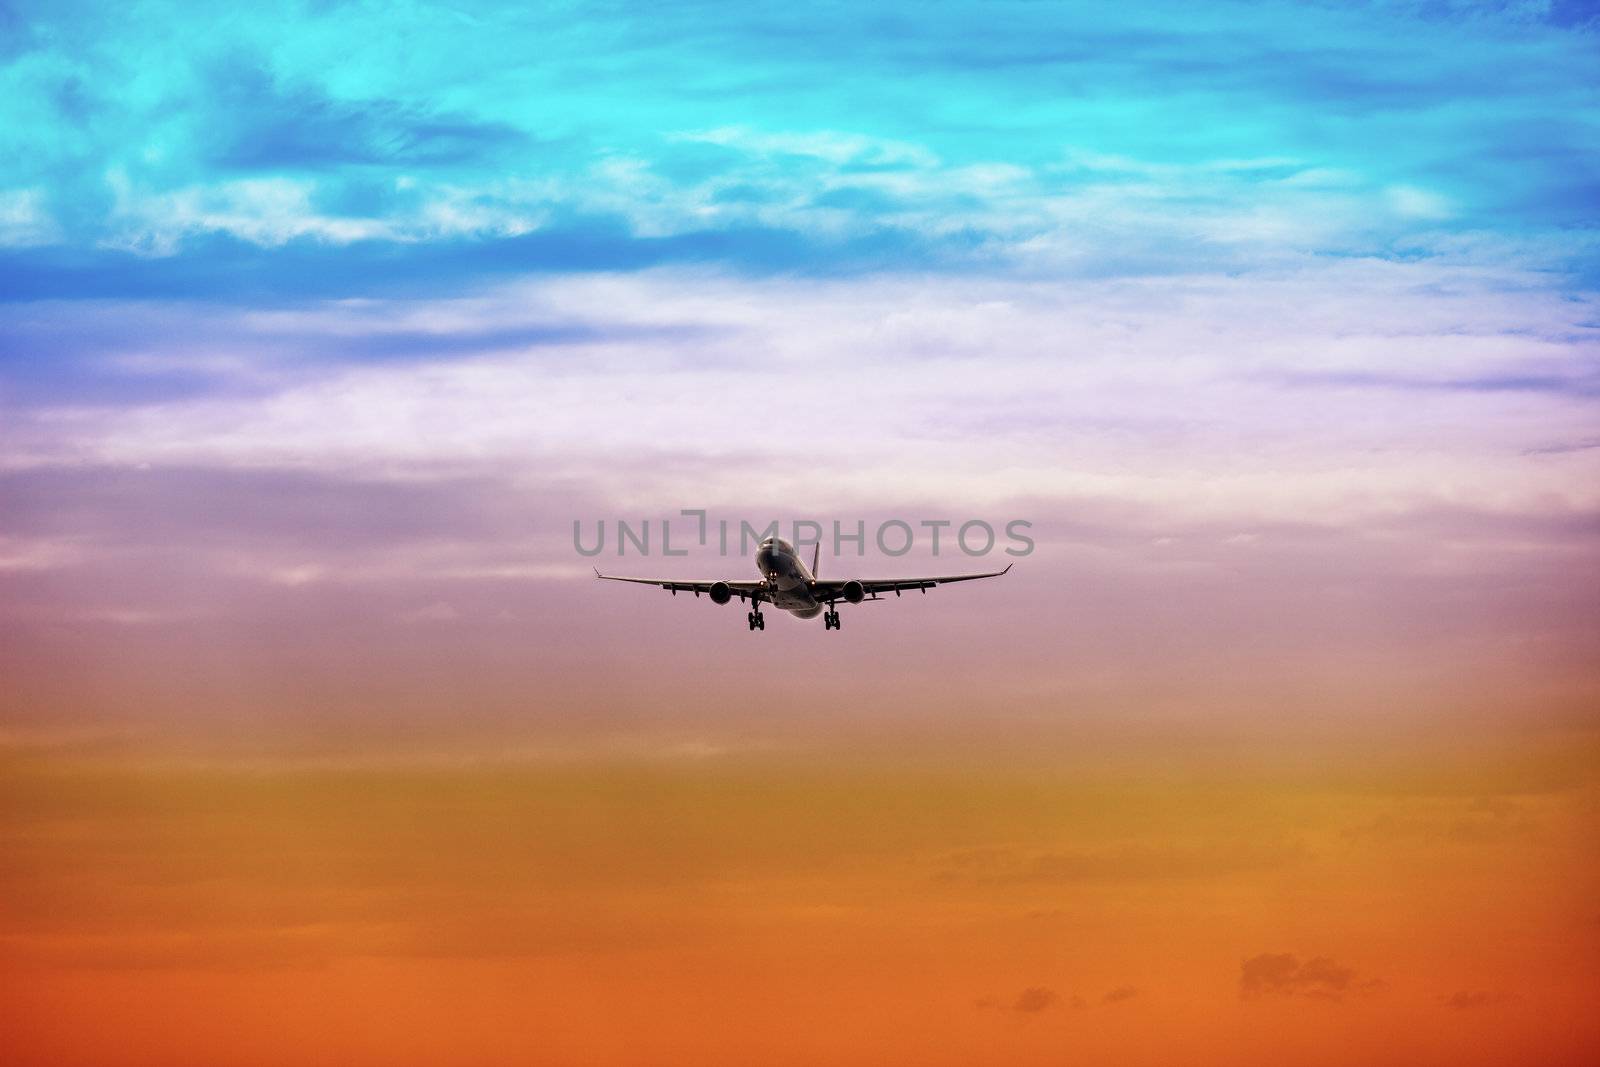 A passenger plane takes off at bright sunset